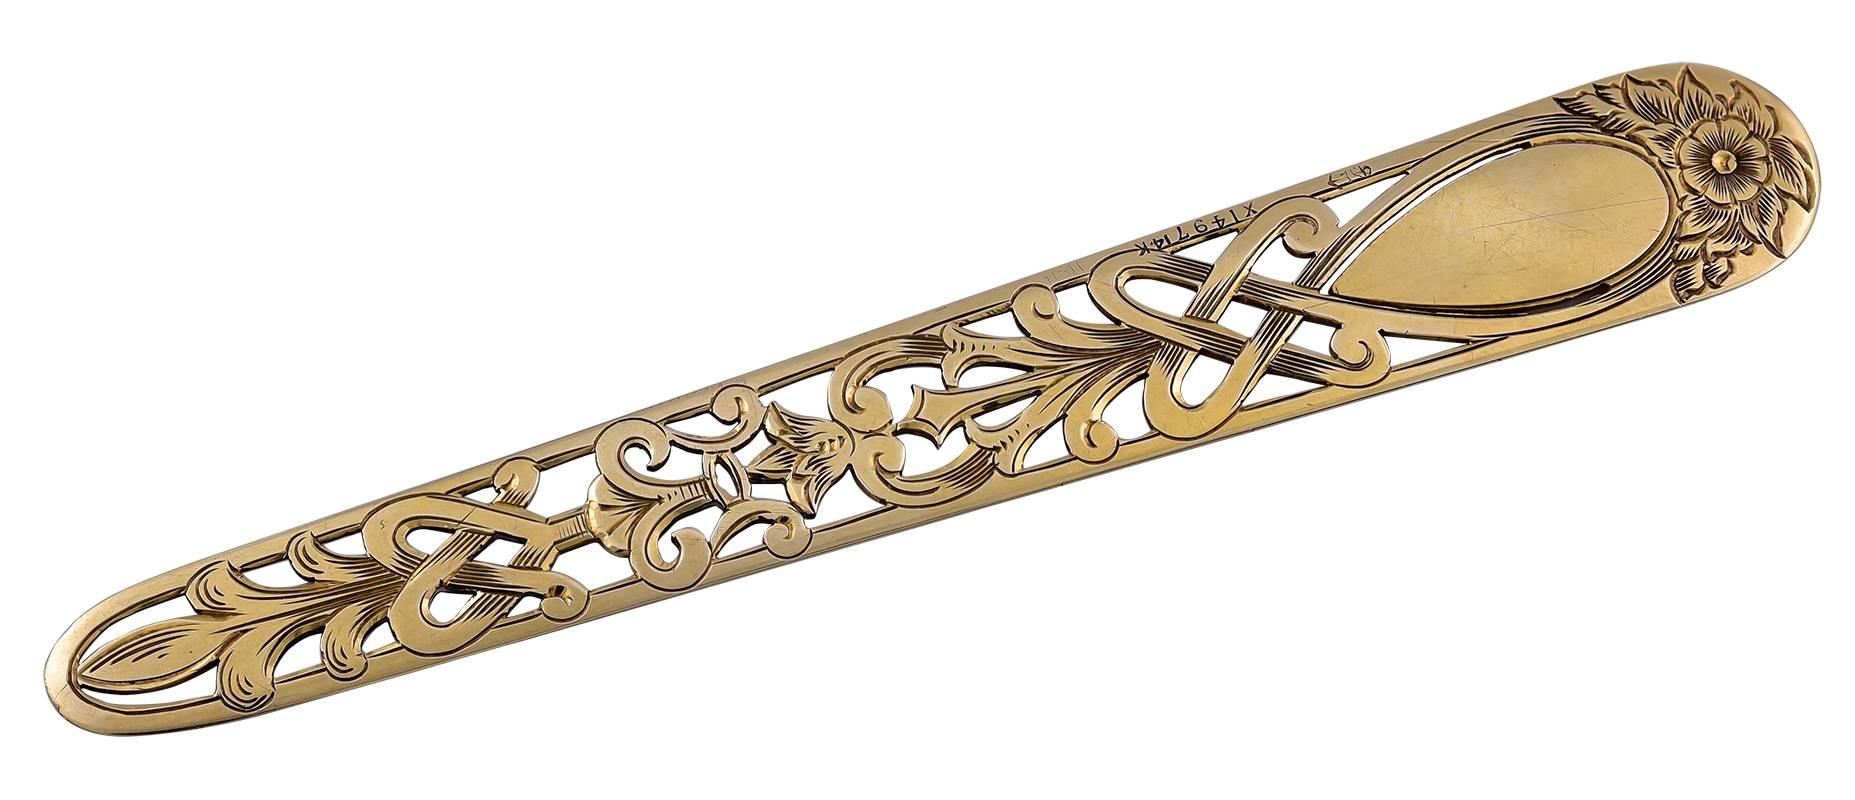 Large antique book mark.  14K yellow gold.  Engraved floral cartouche at top; there is a space for a monogram; the rest is a reticulated intricately-cut leaf pattern.  3 7/8" long.  Pristine.  A beautifully detailed piece.

Aiice Kwartler has